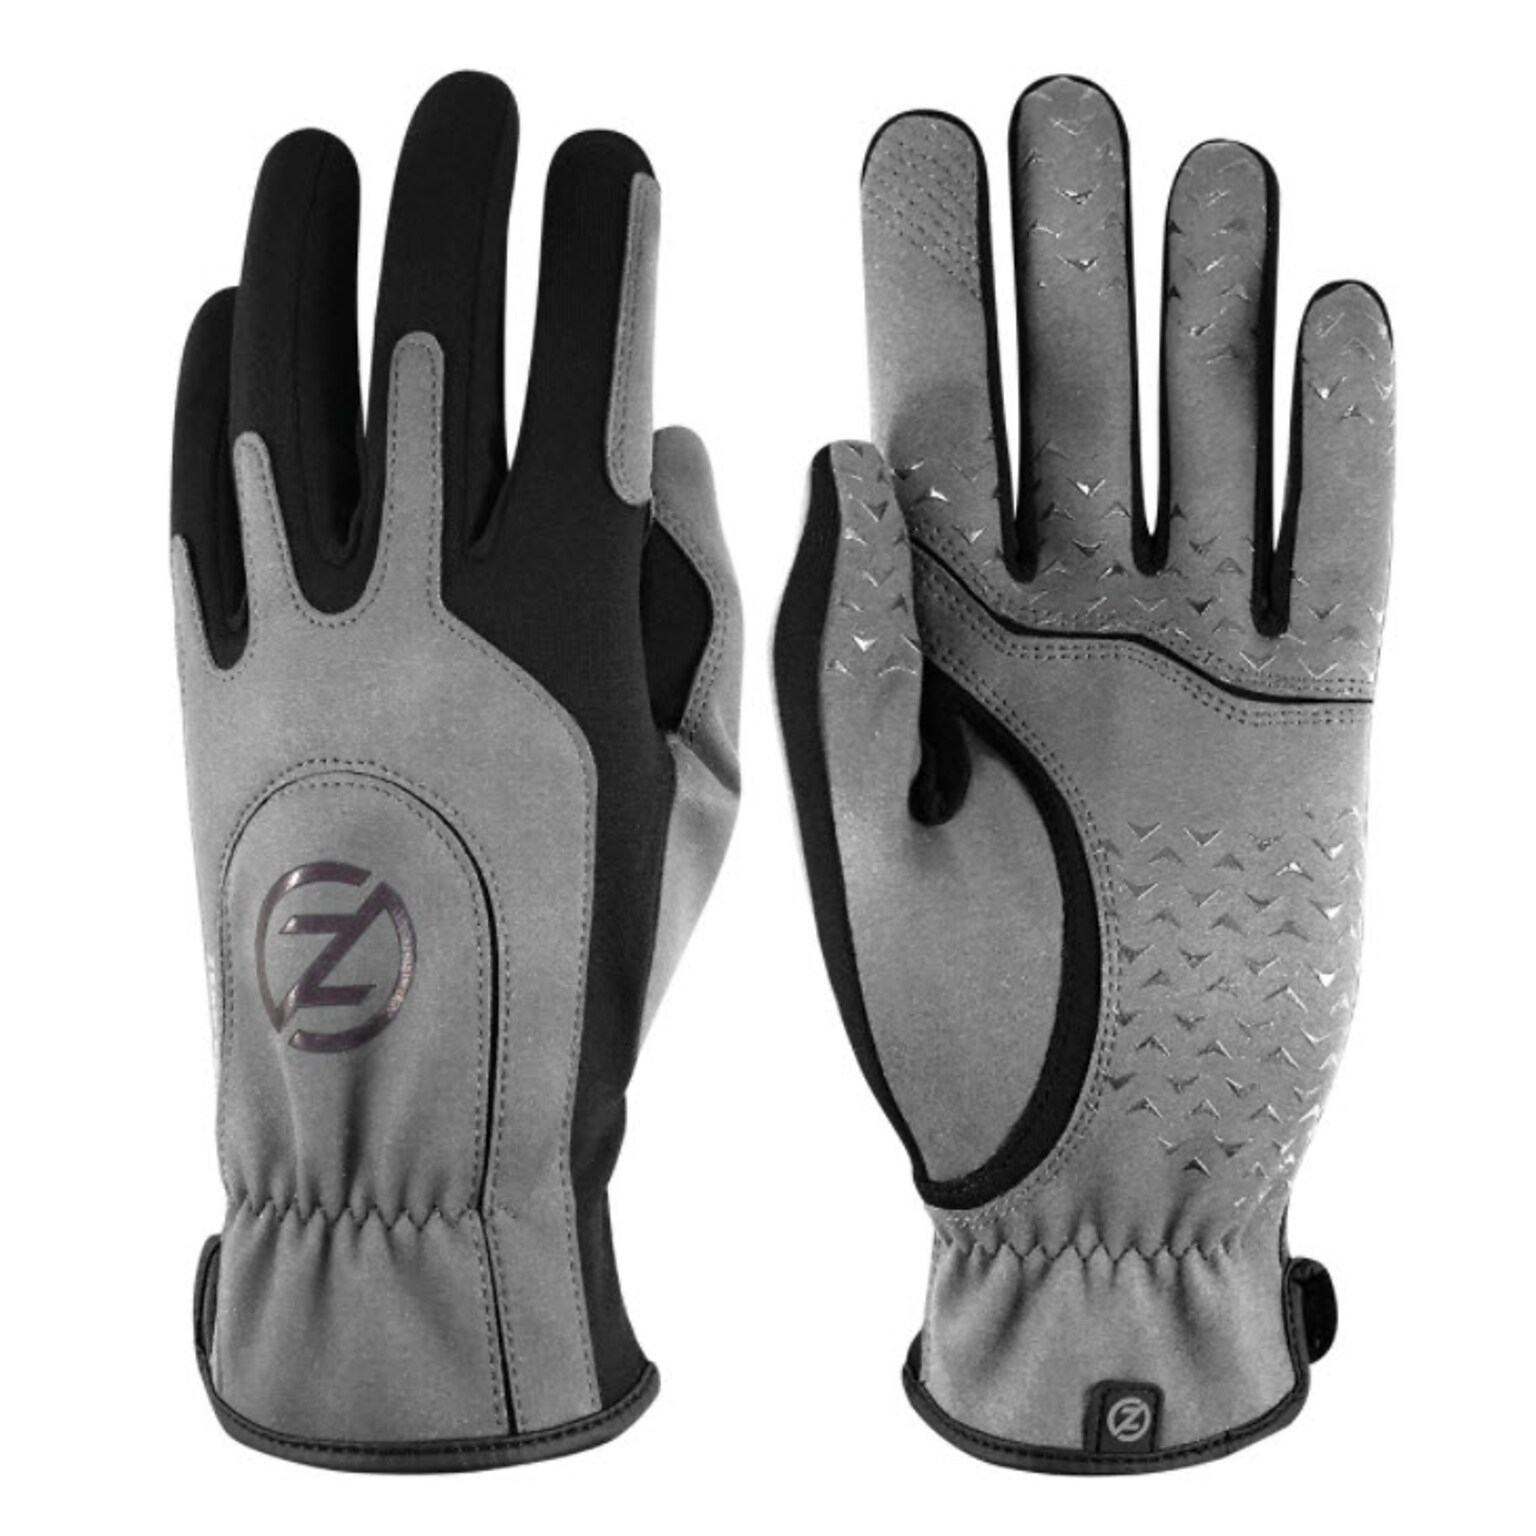 Zero Friction Grey Activewear Mens Glove, Synthetic Leather, Universal Fit, 1 Pair